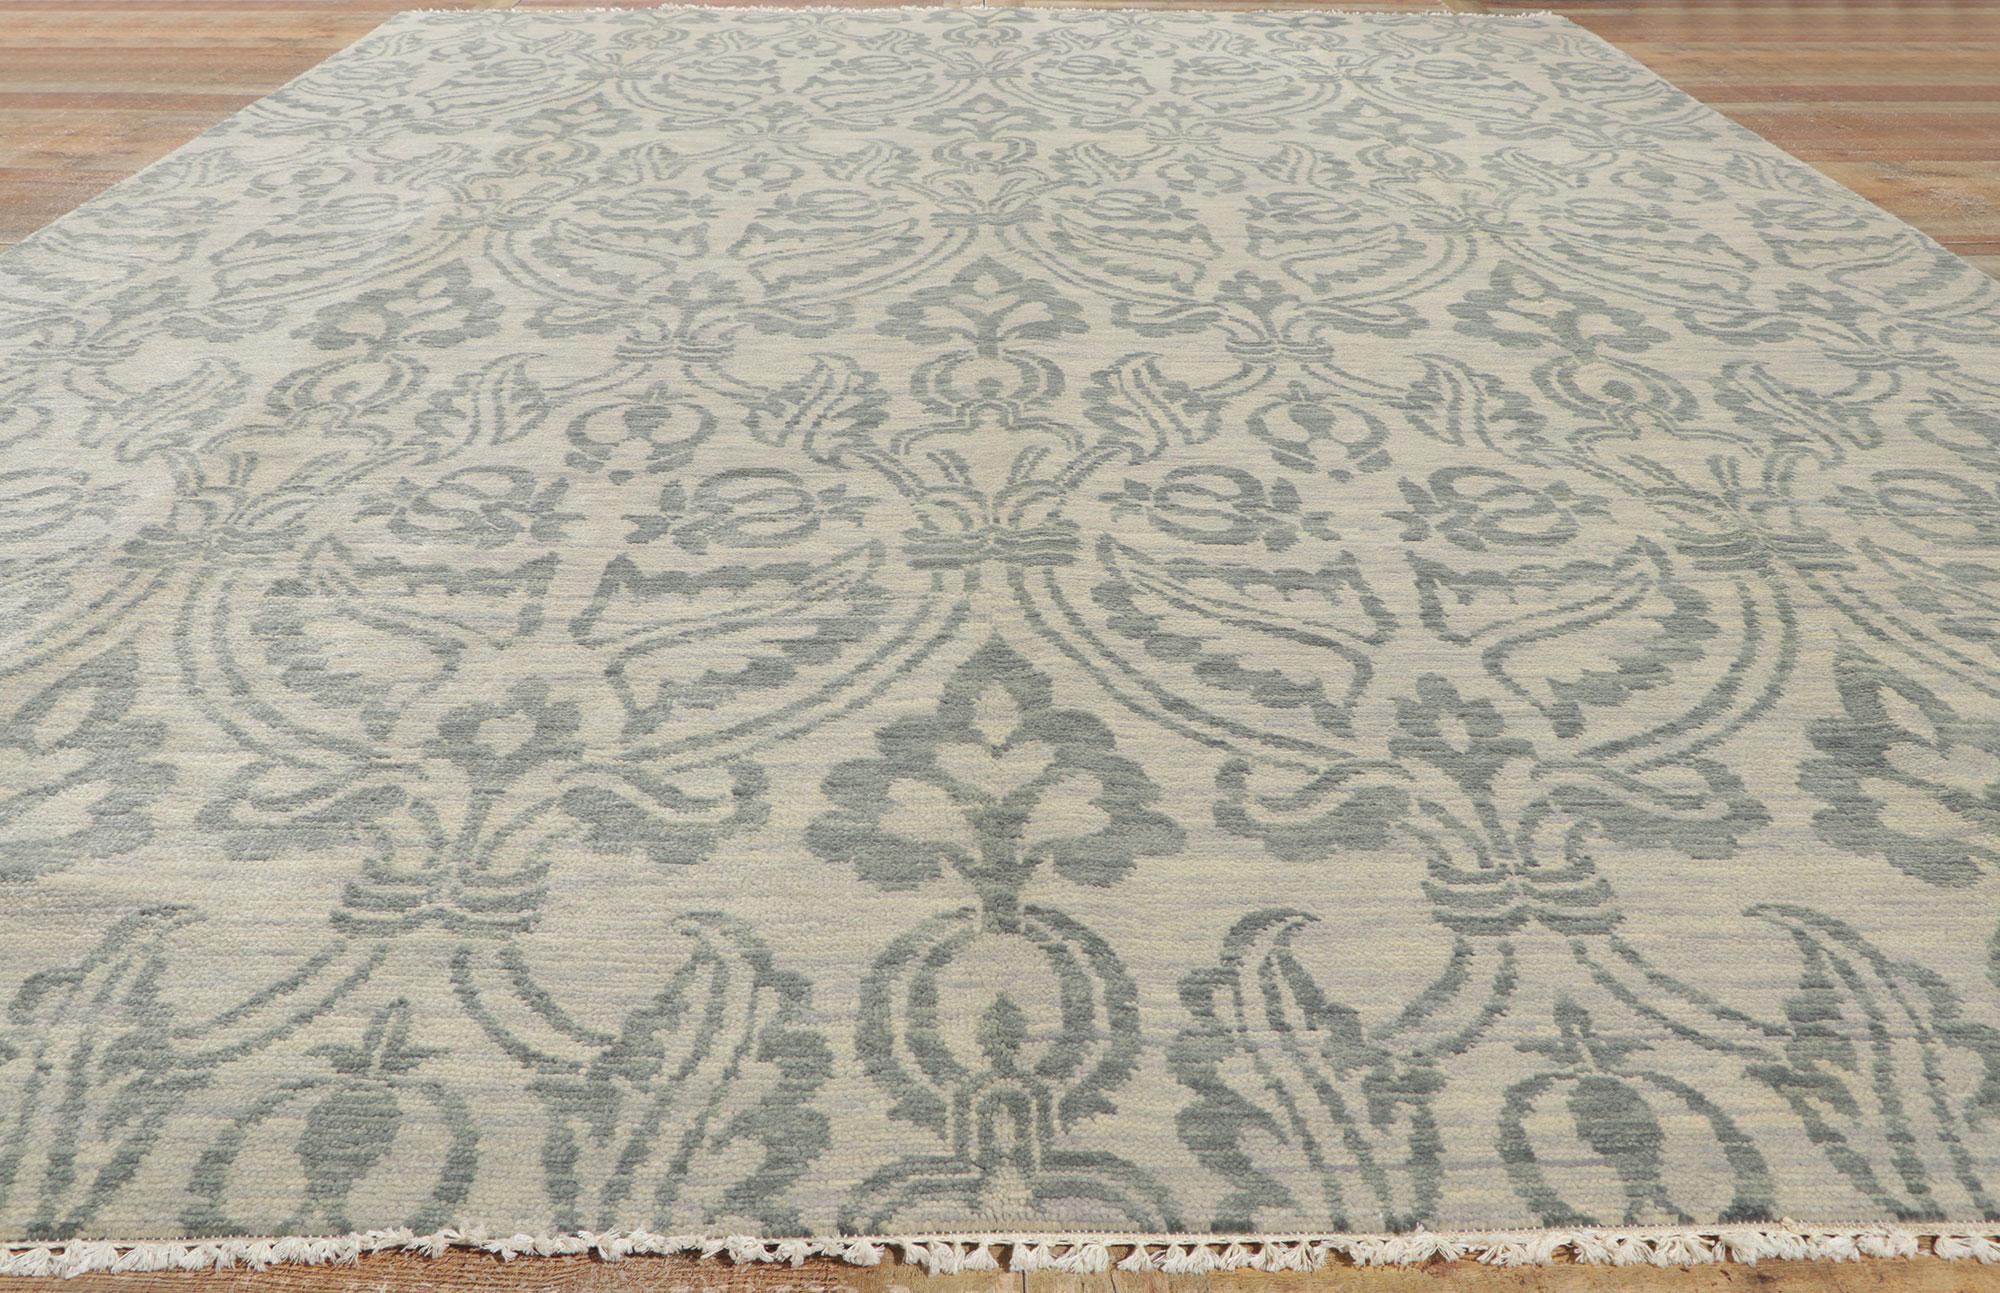 Wool New Transitional Damask Ikat Rug with Blue and Gray Earth-Tone Colors For Sale